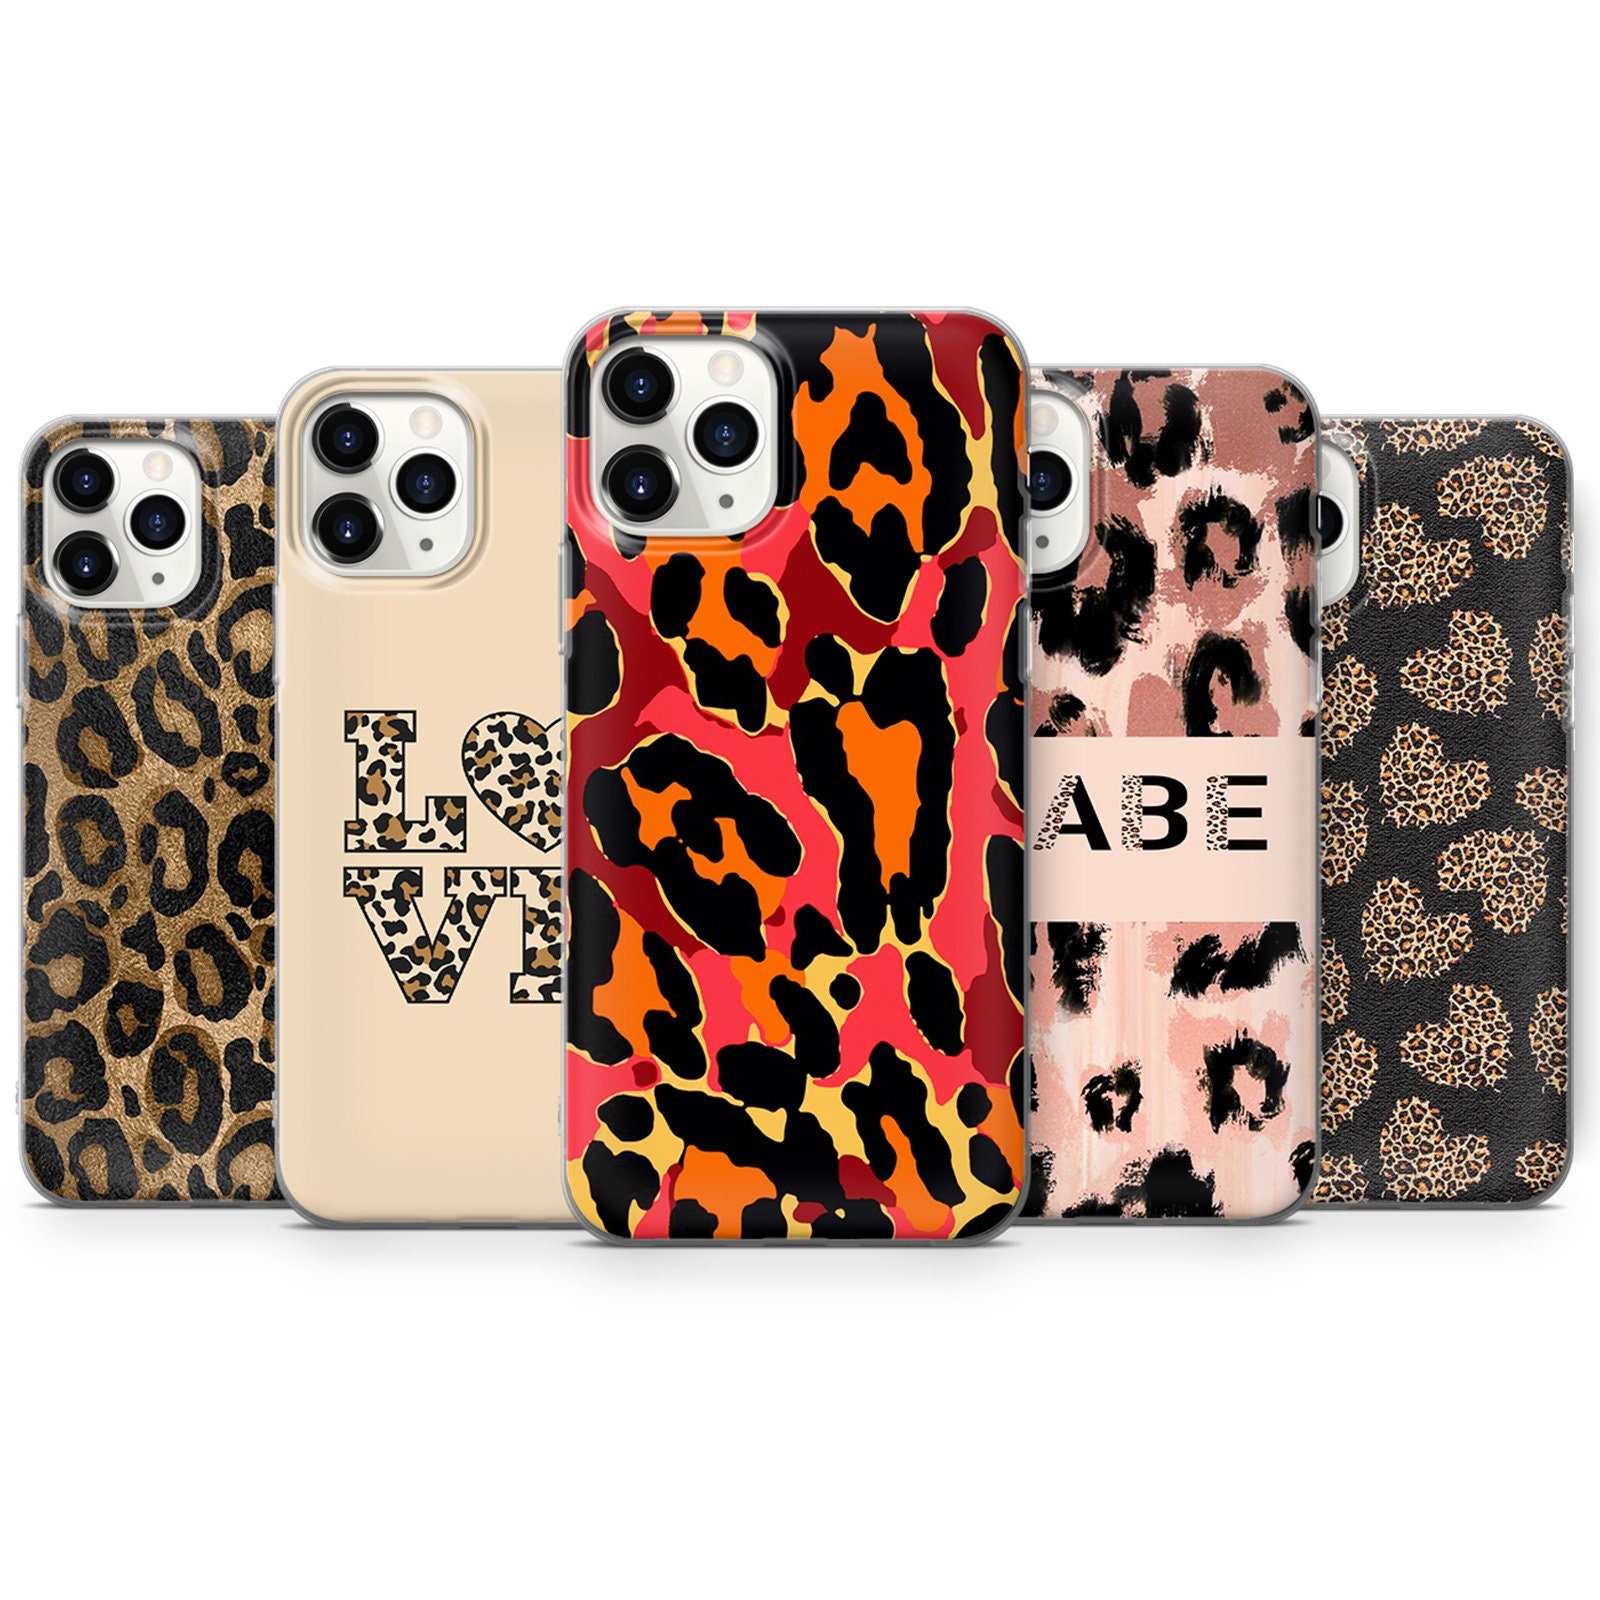 Leopard Designer iPhone Case Cover✨ Give your phone a new look